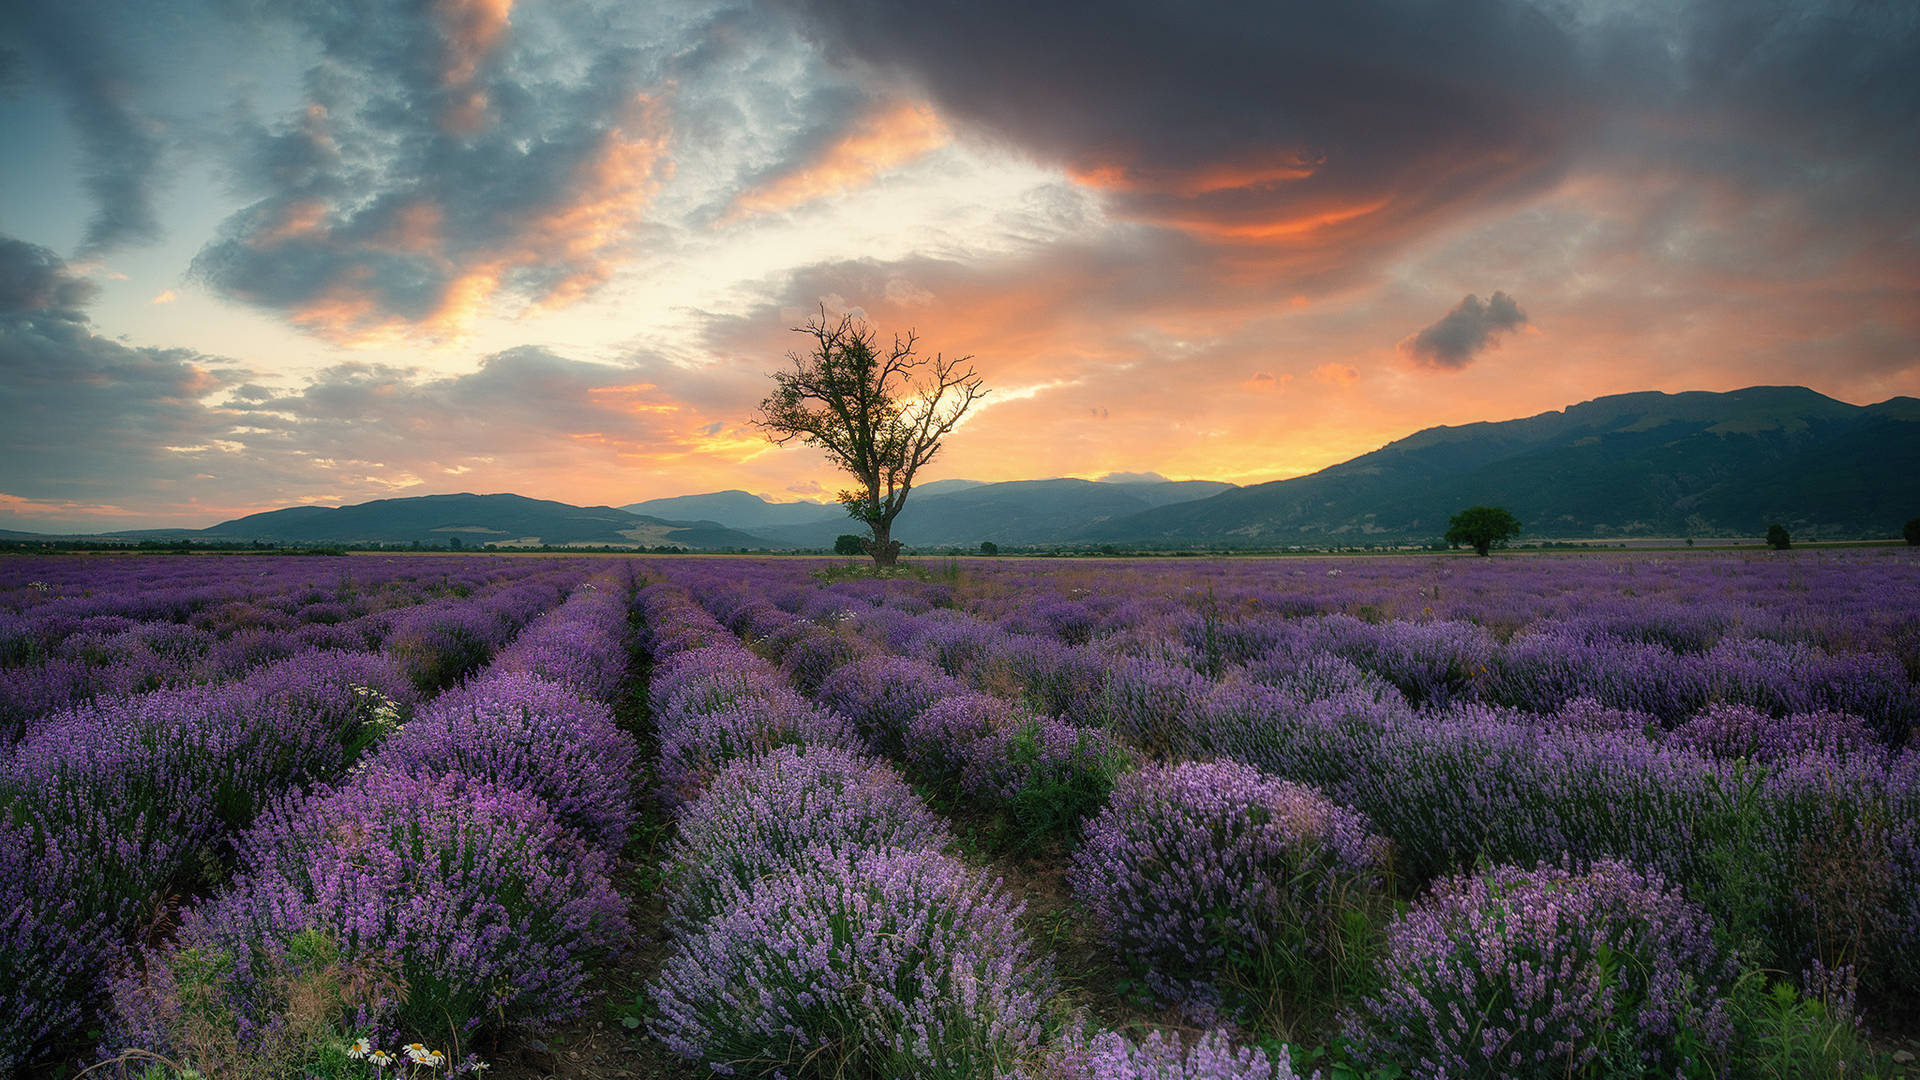 Lavender Aesthetic Field, Mountains, And Sunset Background